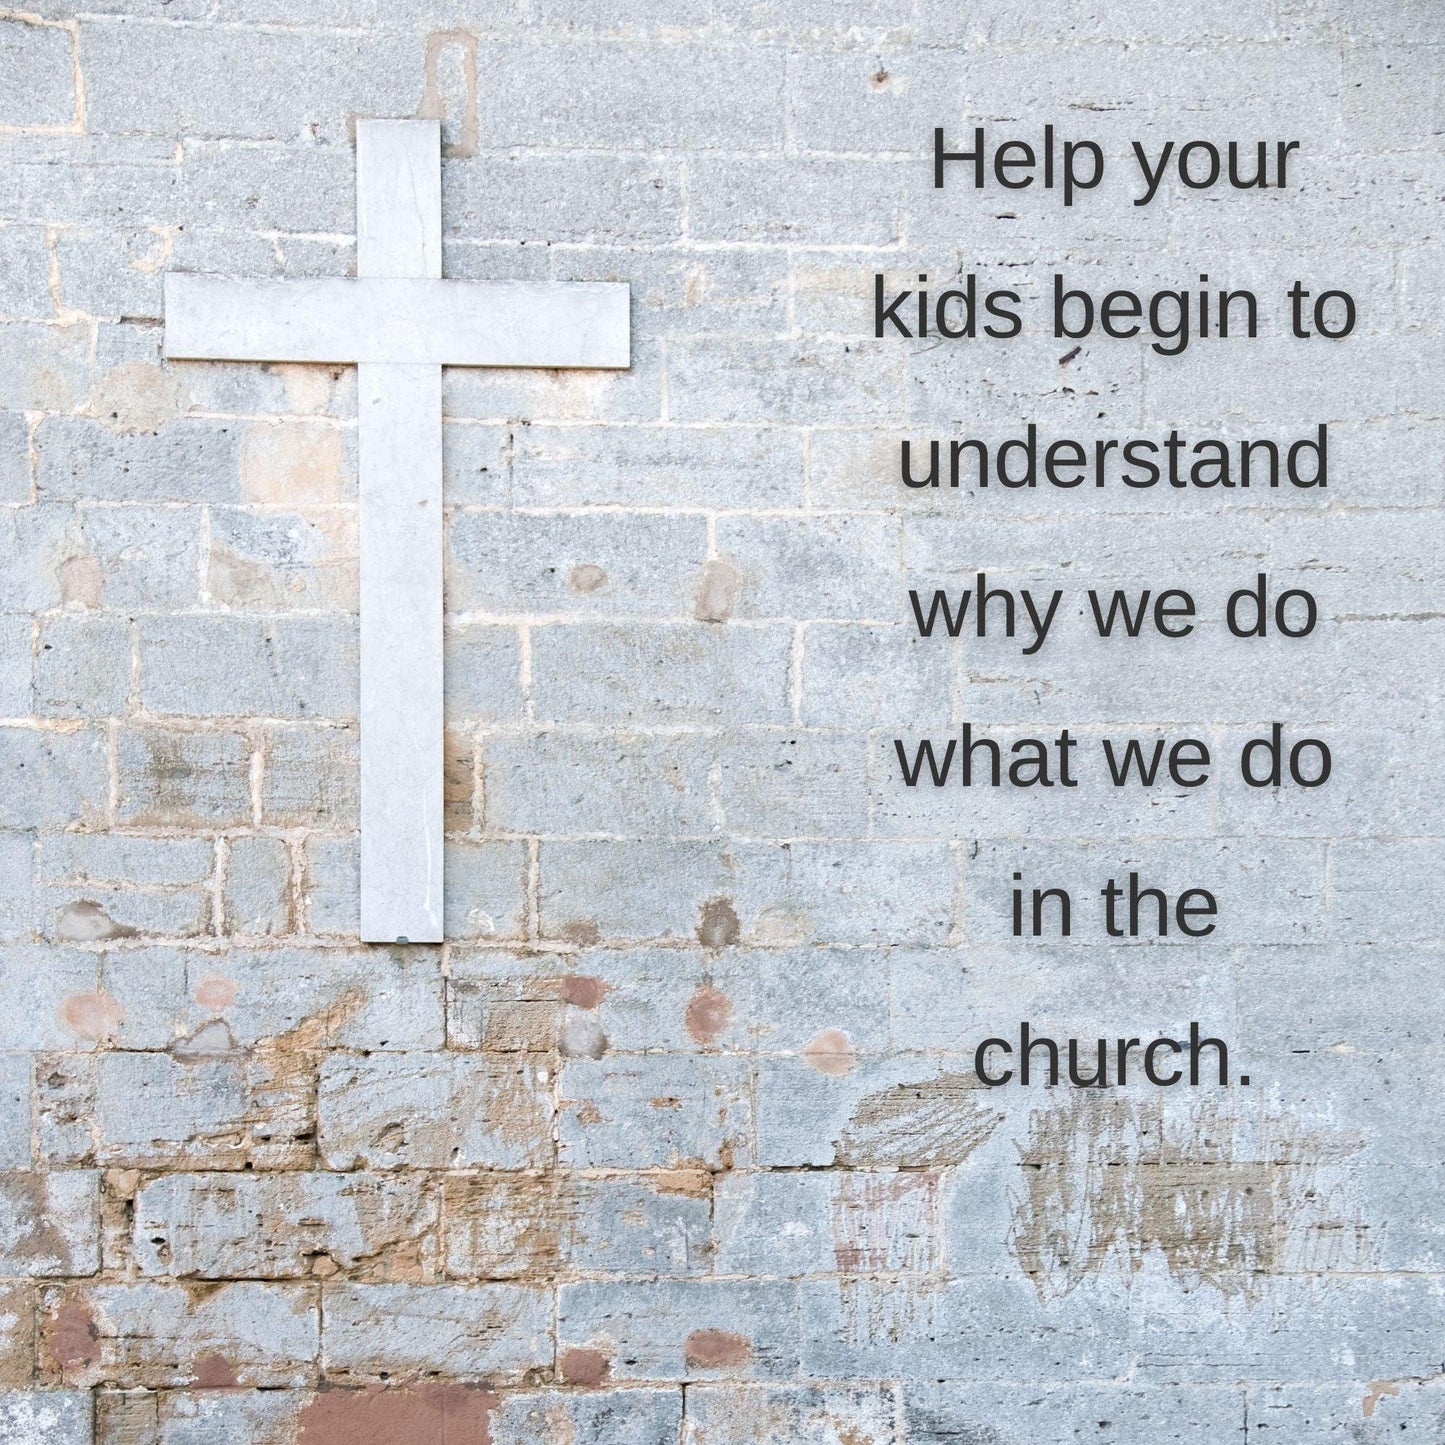 Back to Basics: 5-Week Children's Ministry Curriculum